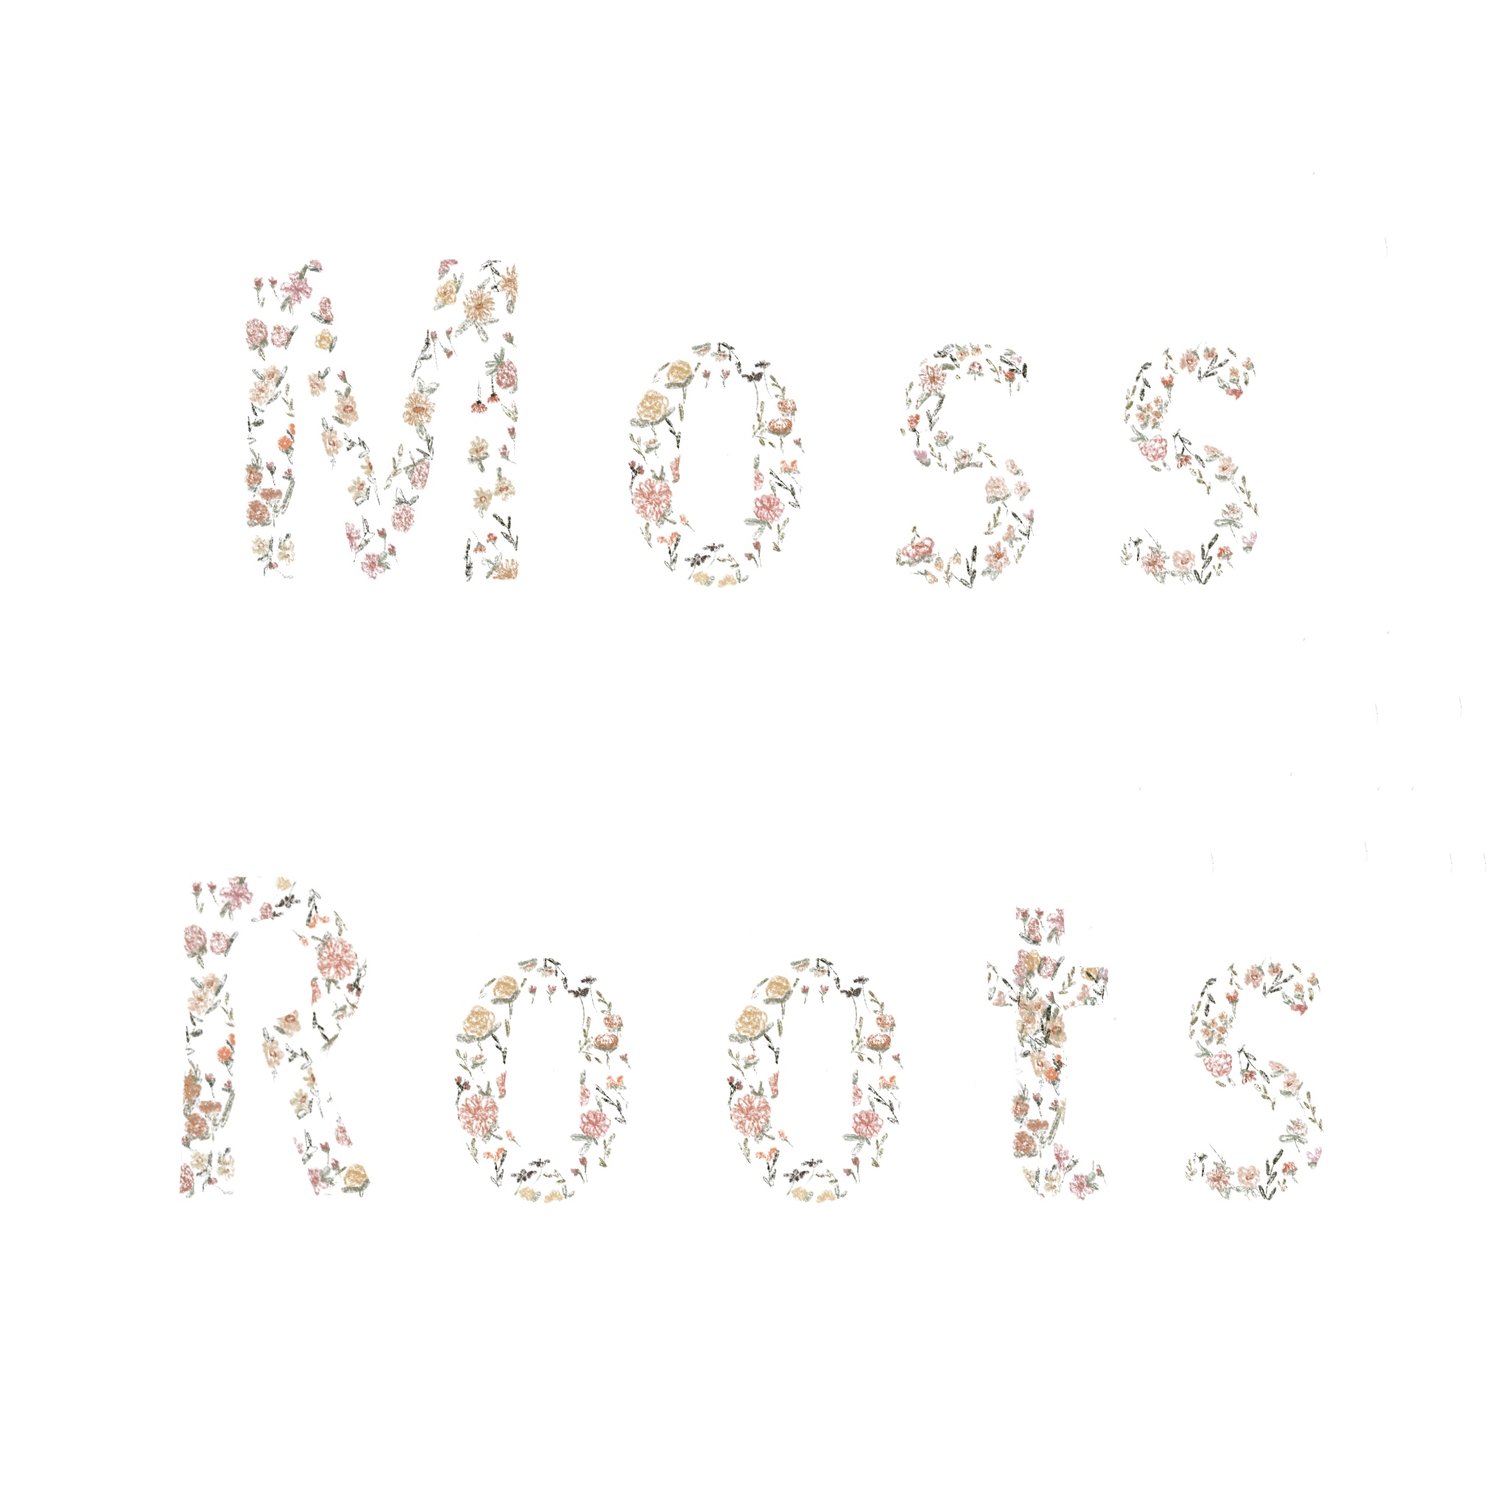 Moss Roots Home